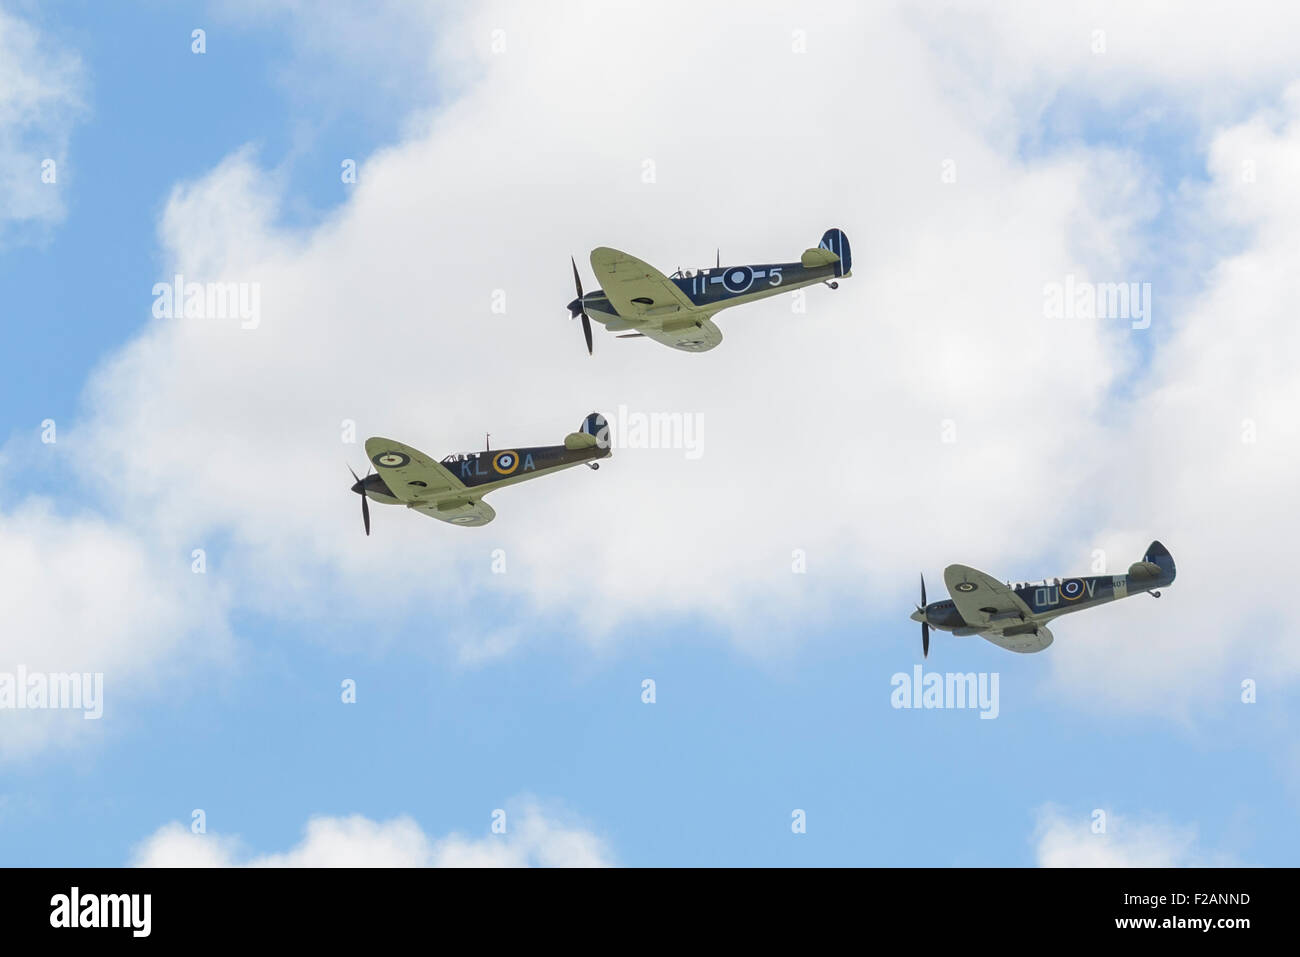 Vintage warplanes flypast in the UK of a Spitfire Mk.Ia (X4650), Spitfire Tr.IX 2 seater (ML407), Seafire LF.III (PP972). Stock Photo